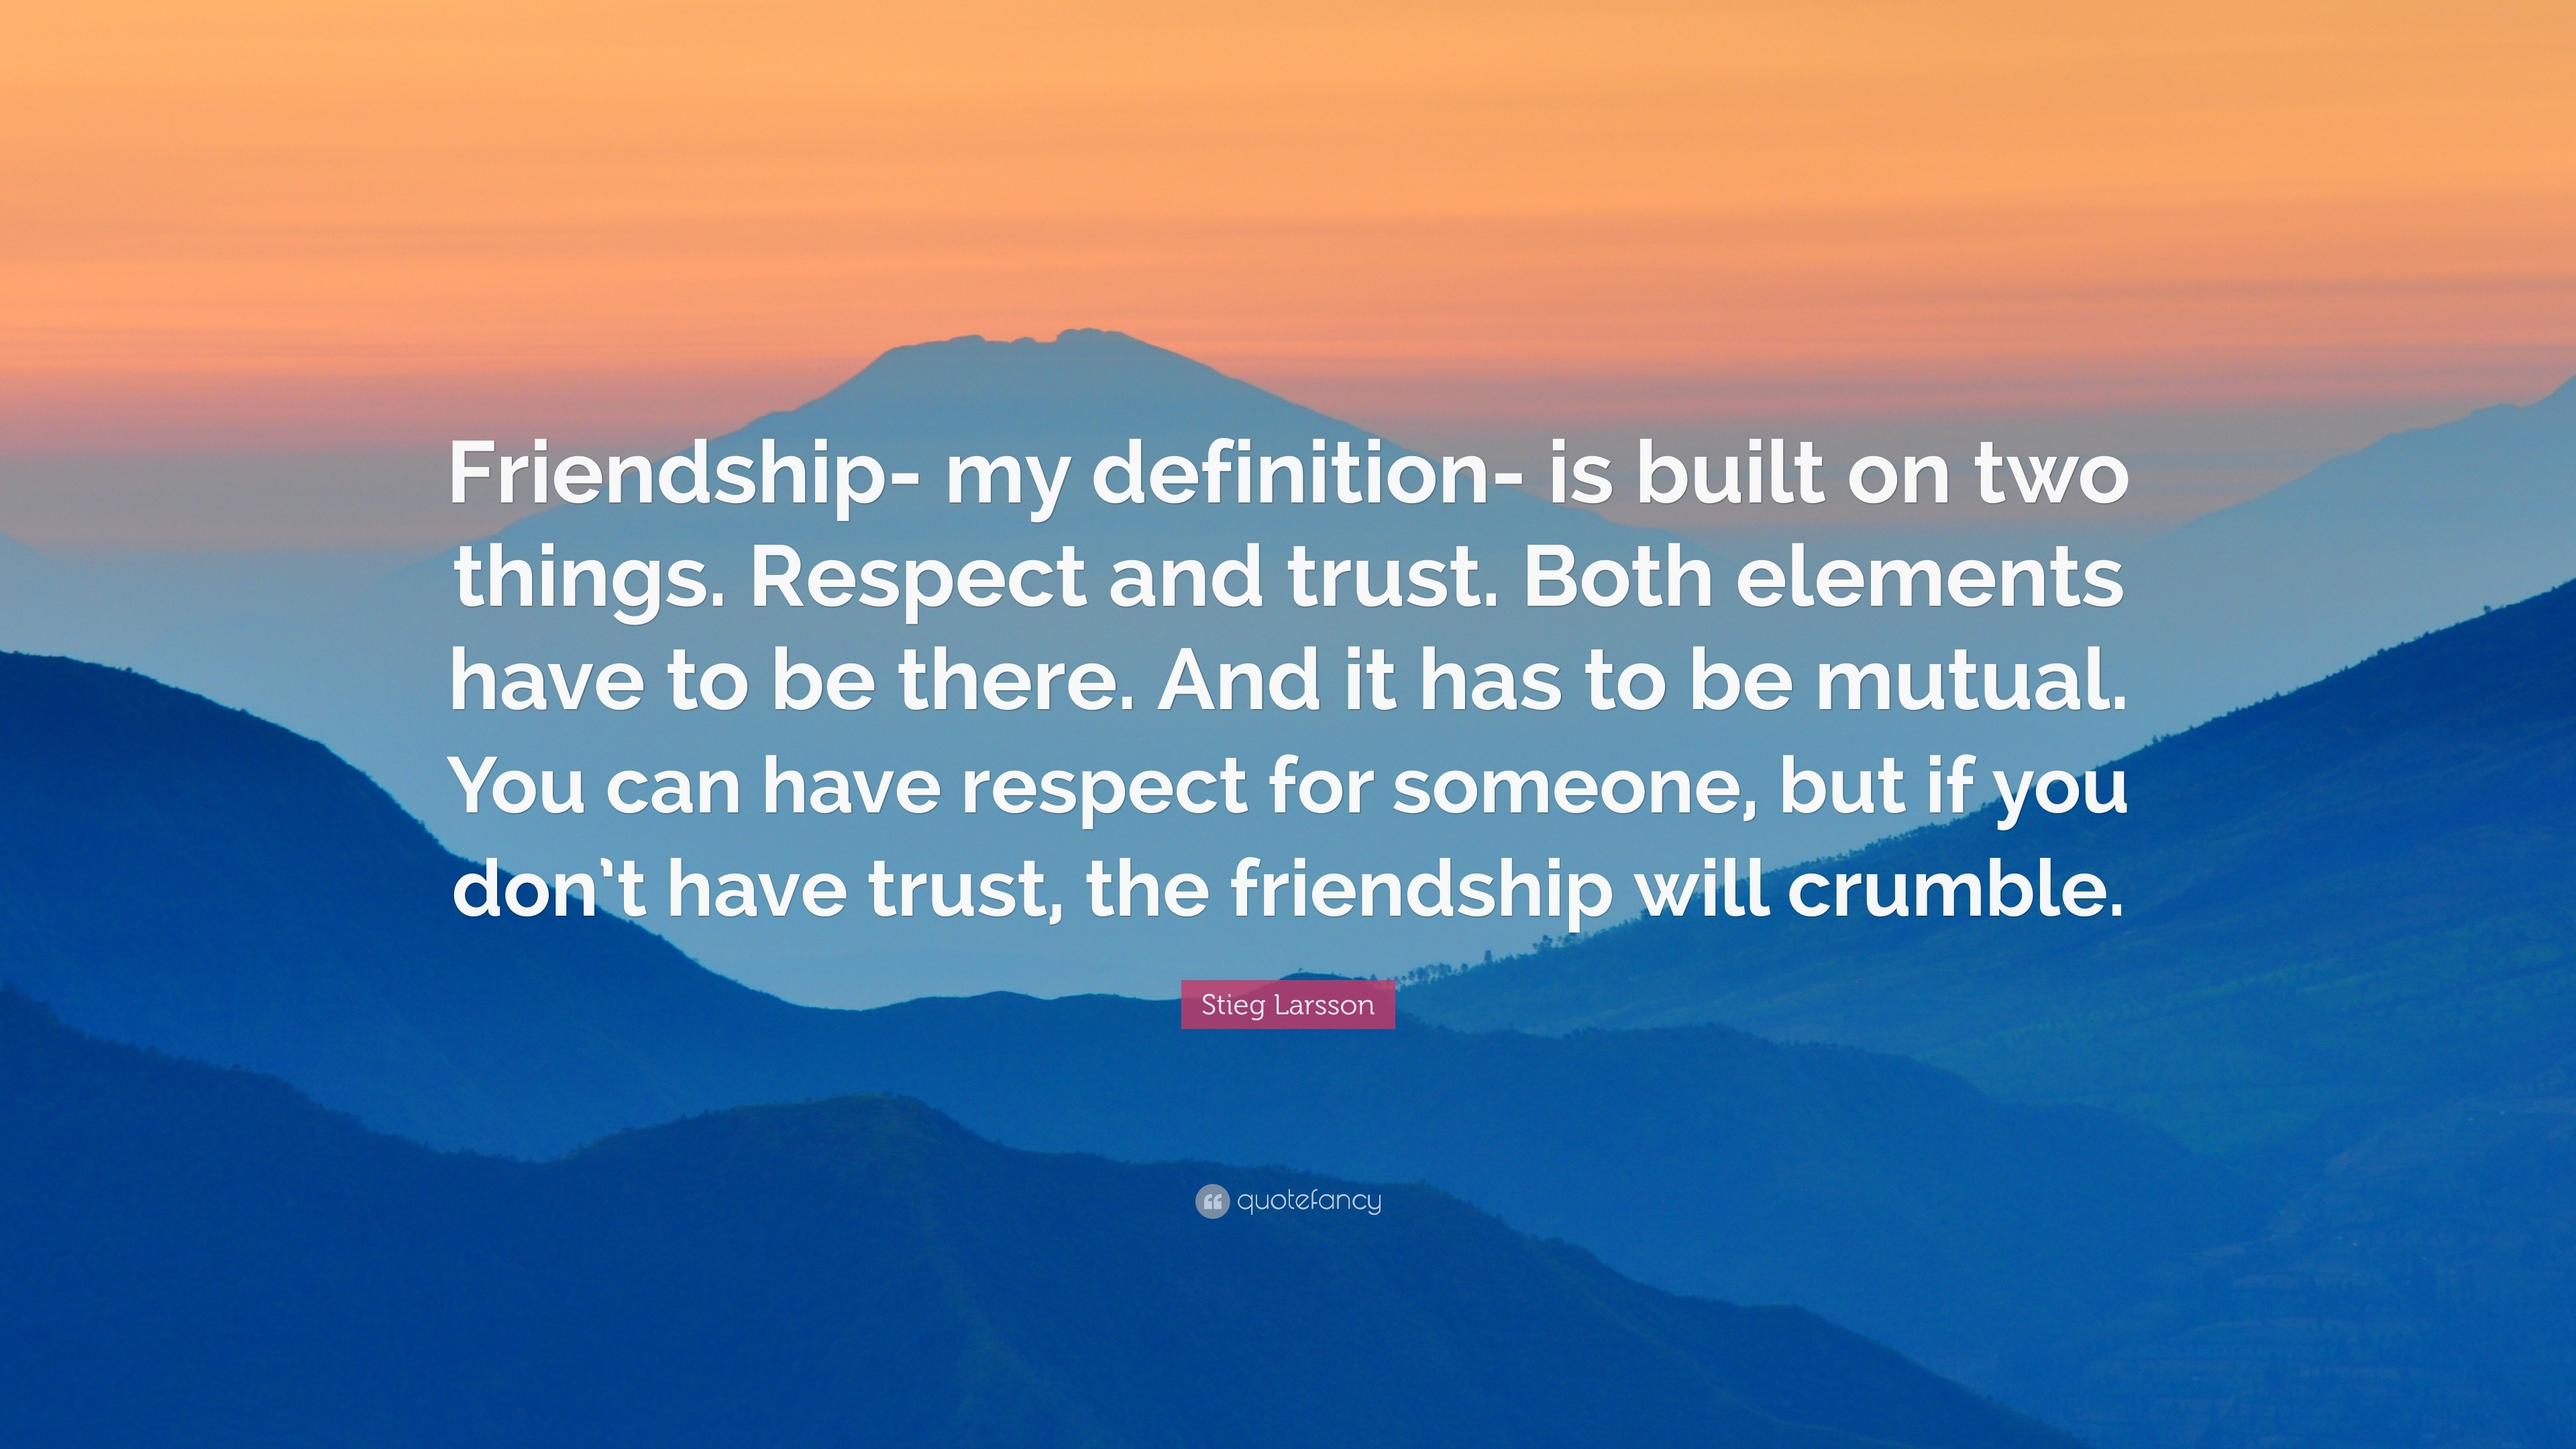 Stieg Larsson Quote Friendship My Definition Is Built On Two Things Respect And Trust Both Elements Have To Be There And It Has To Be M 12 Wallpapers Quotefancy